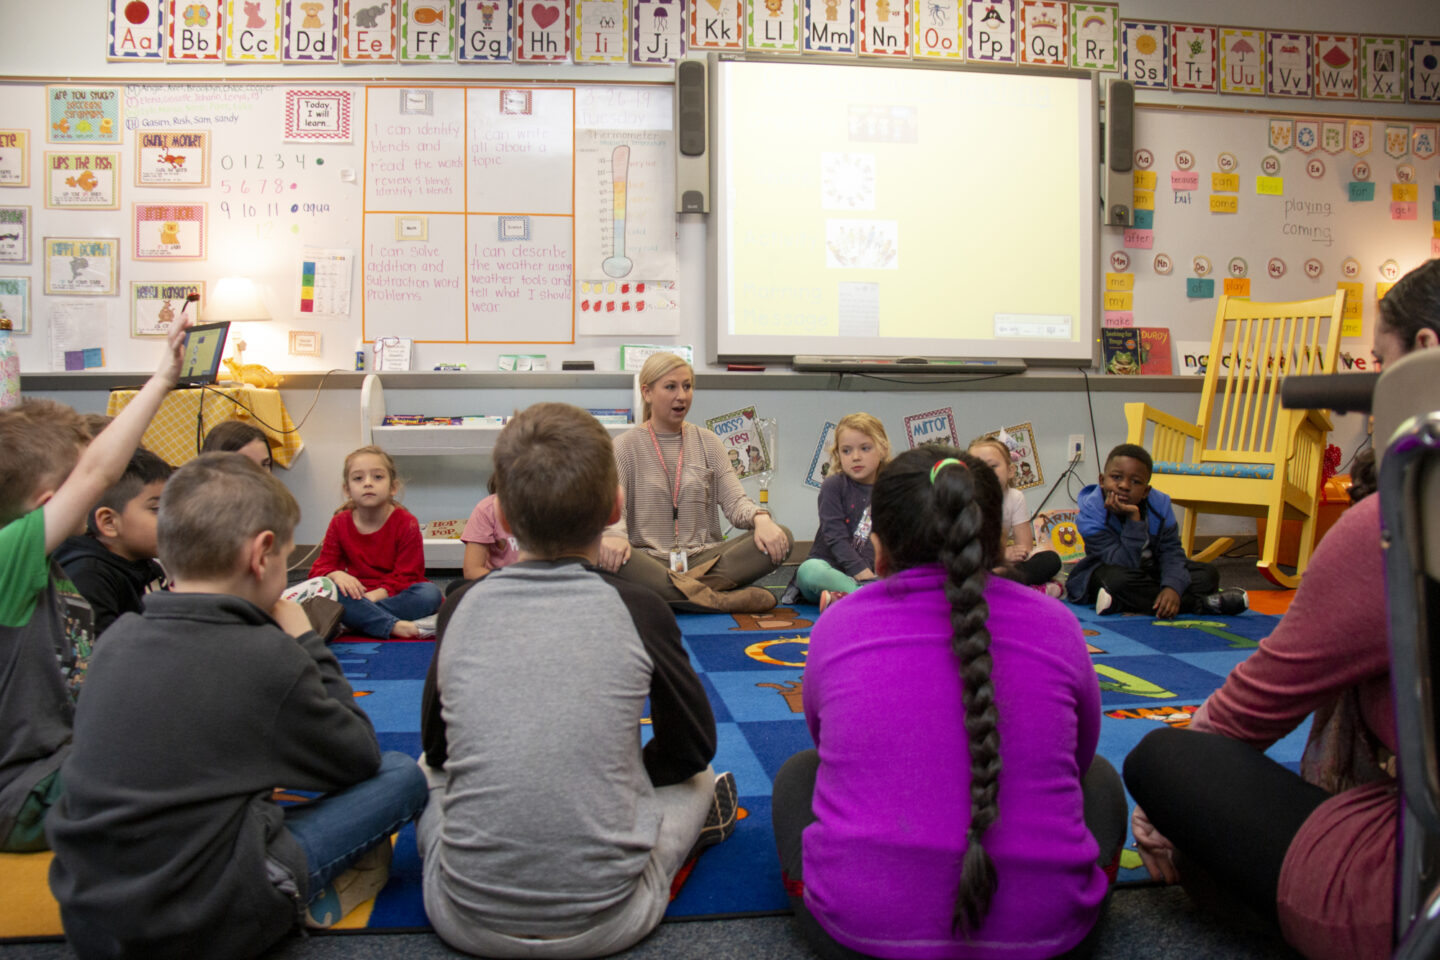 Students participate in a classroom activity at an elementary school in North Carolina